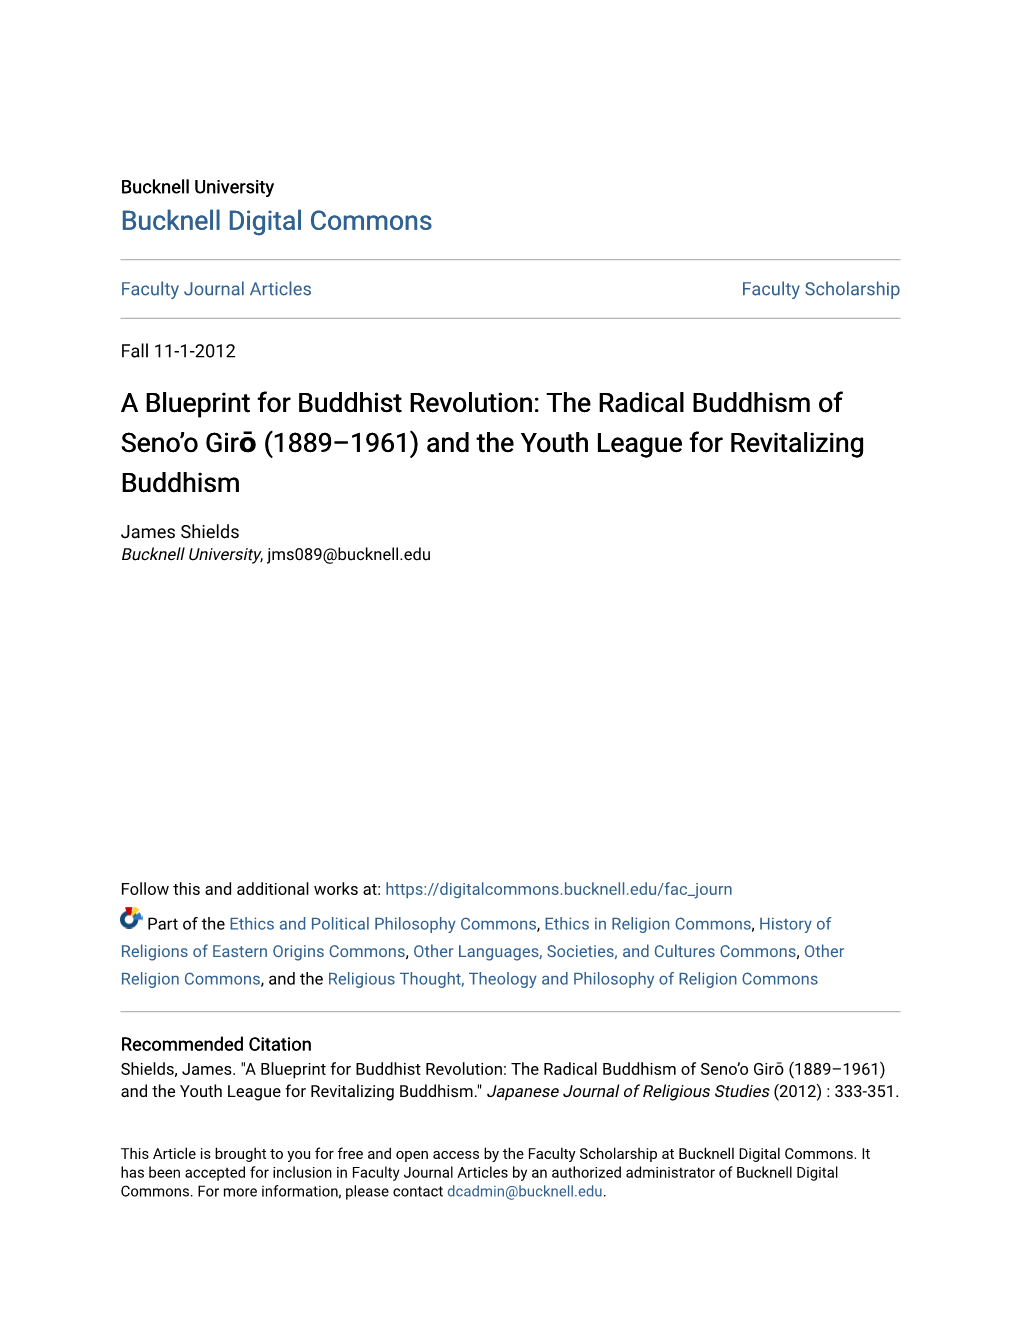 Bucknell Digital Commons a Blueprint for Buddhist Revolution: the Radical Buddhism of Seno'o Girō (1889–1961) and the Youth